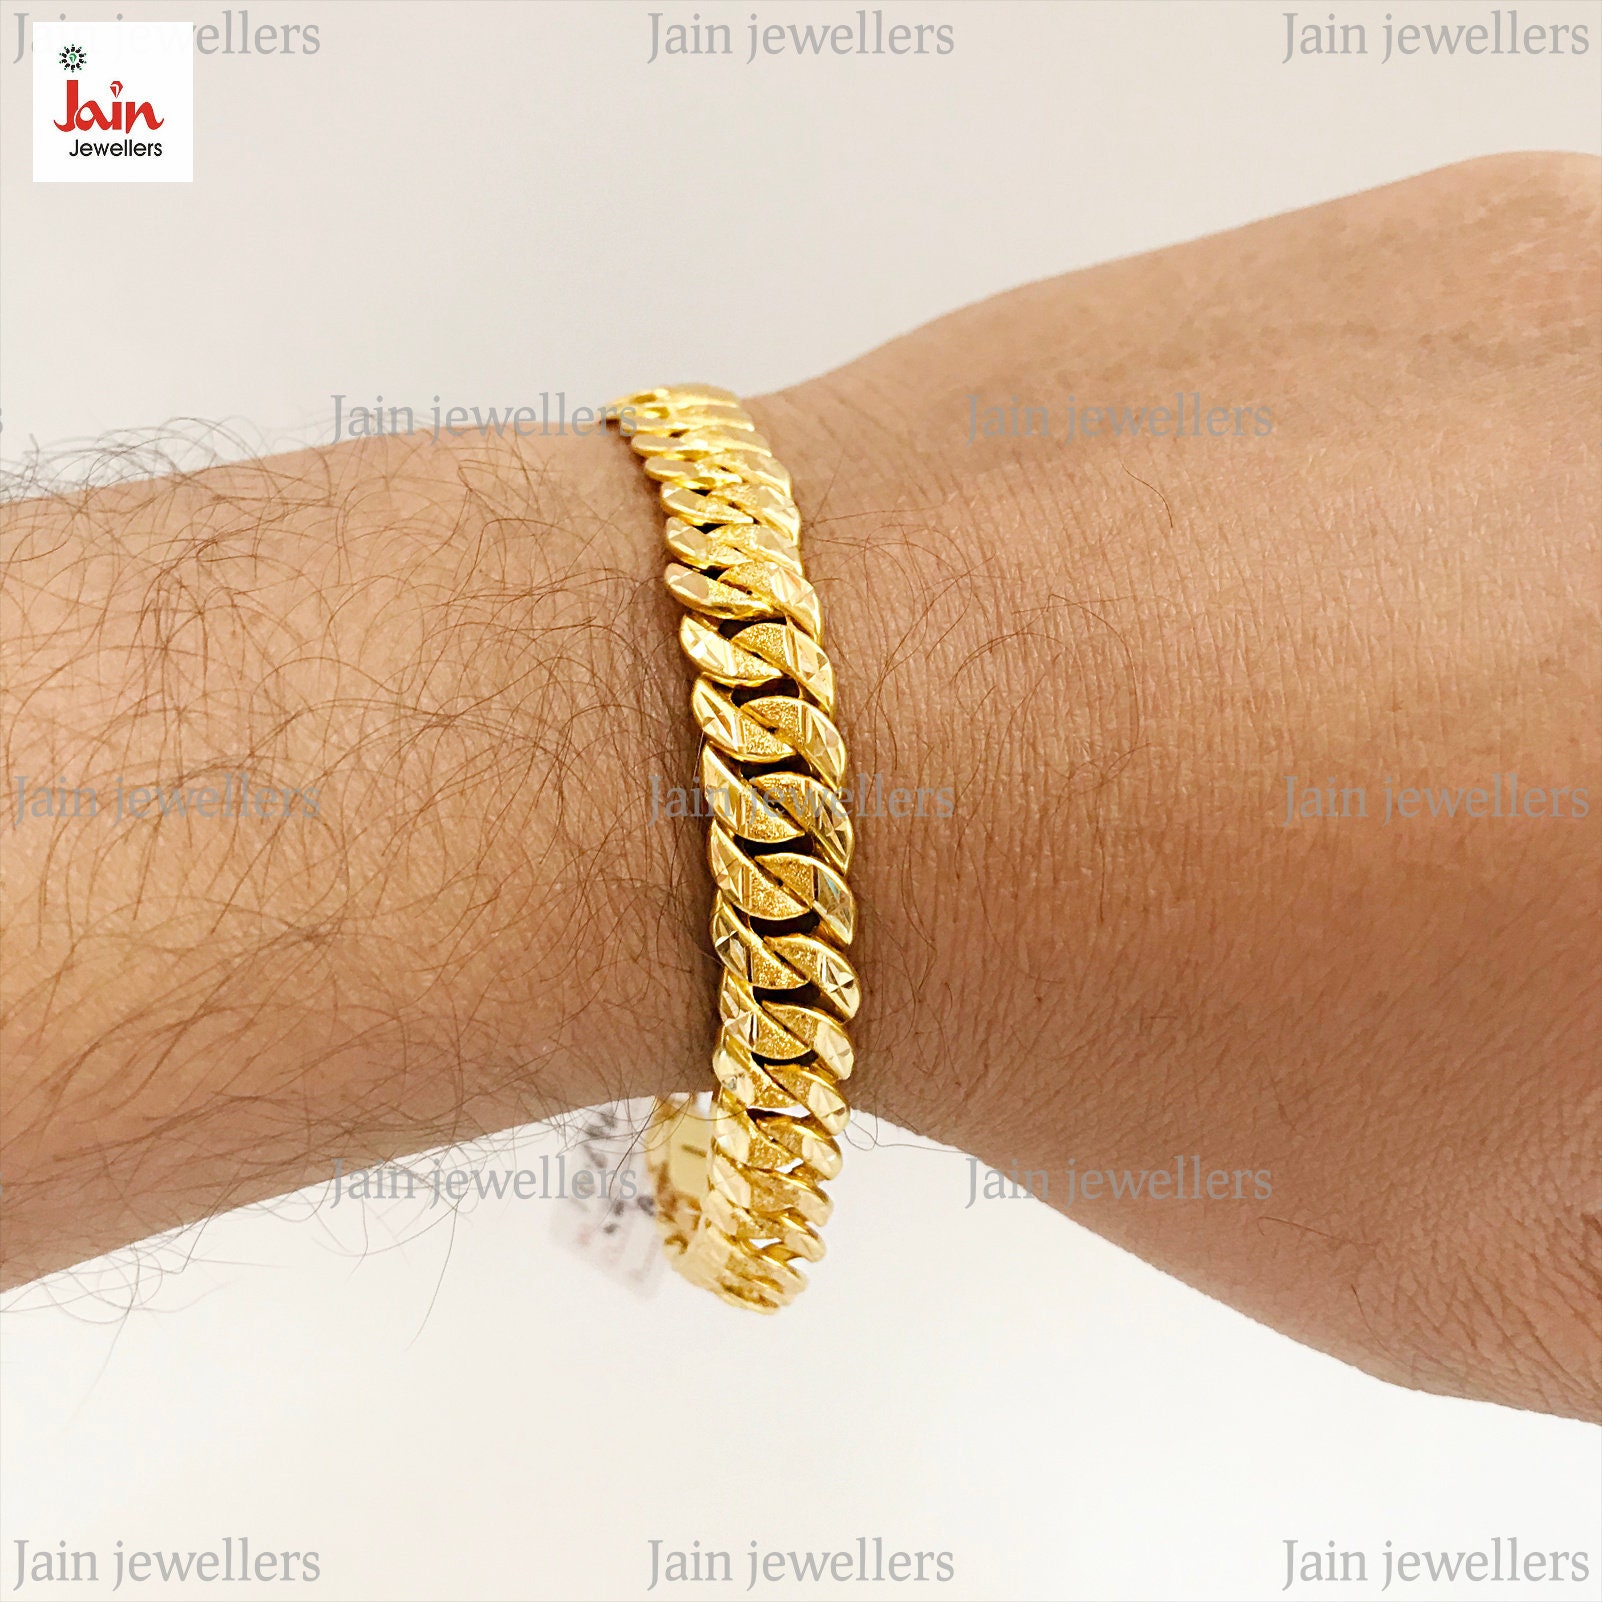 P.C. Chandra Jewellers 22KT Yellow Gold Bracelet for Men : Amazon.in:  Fashion